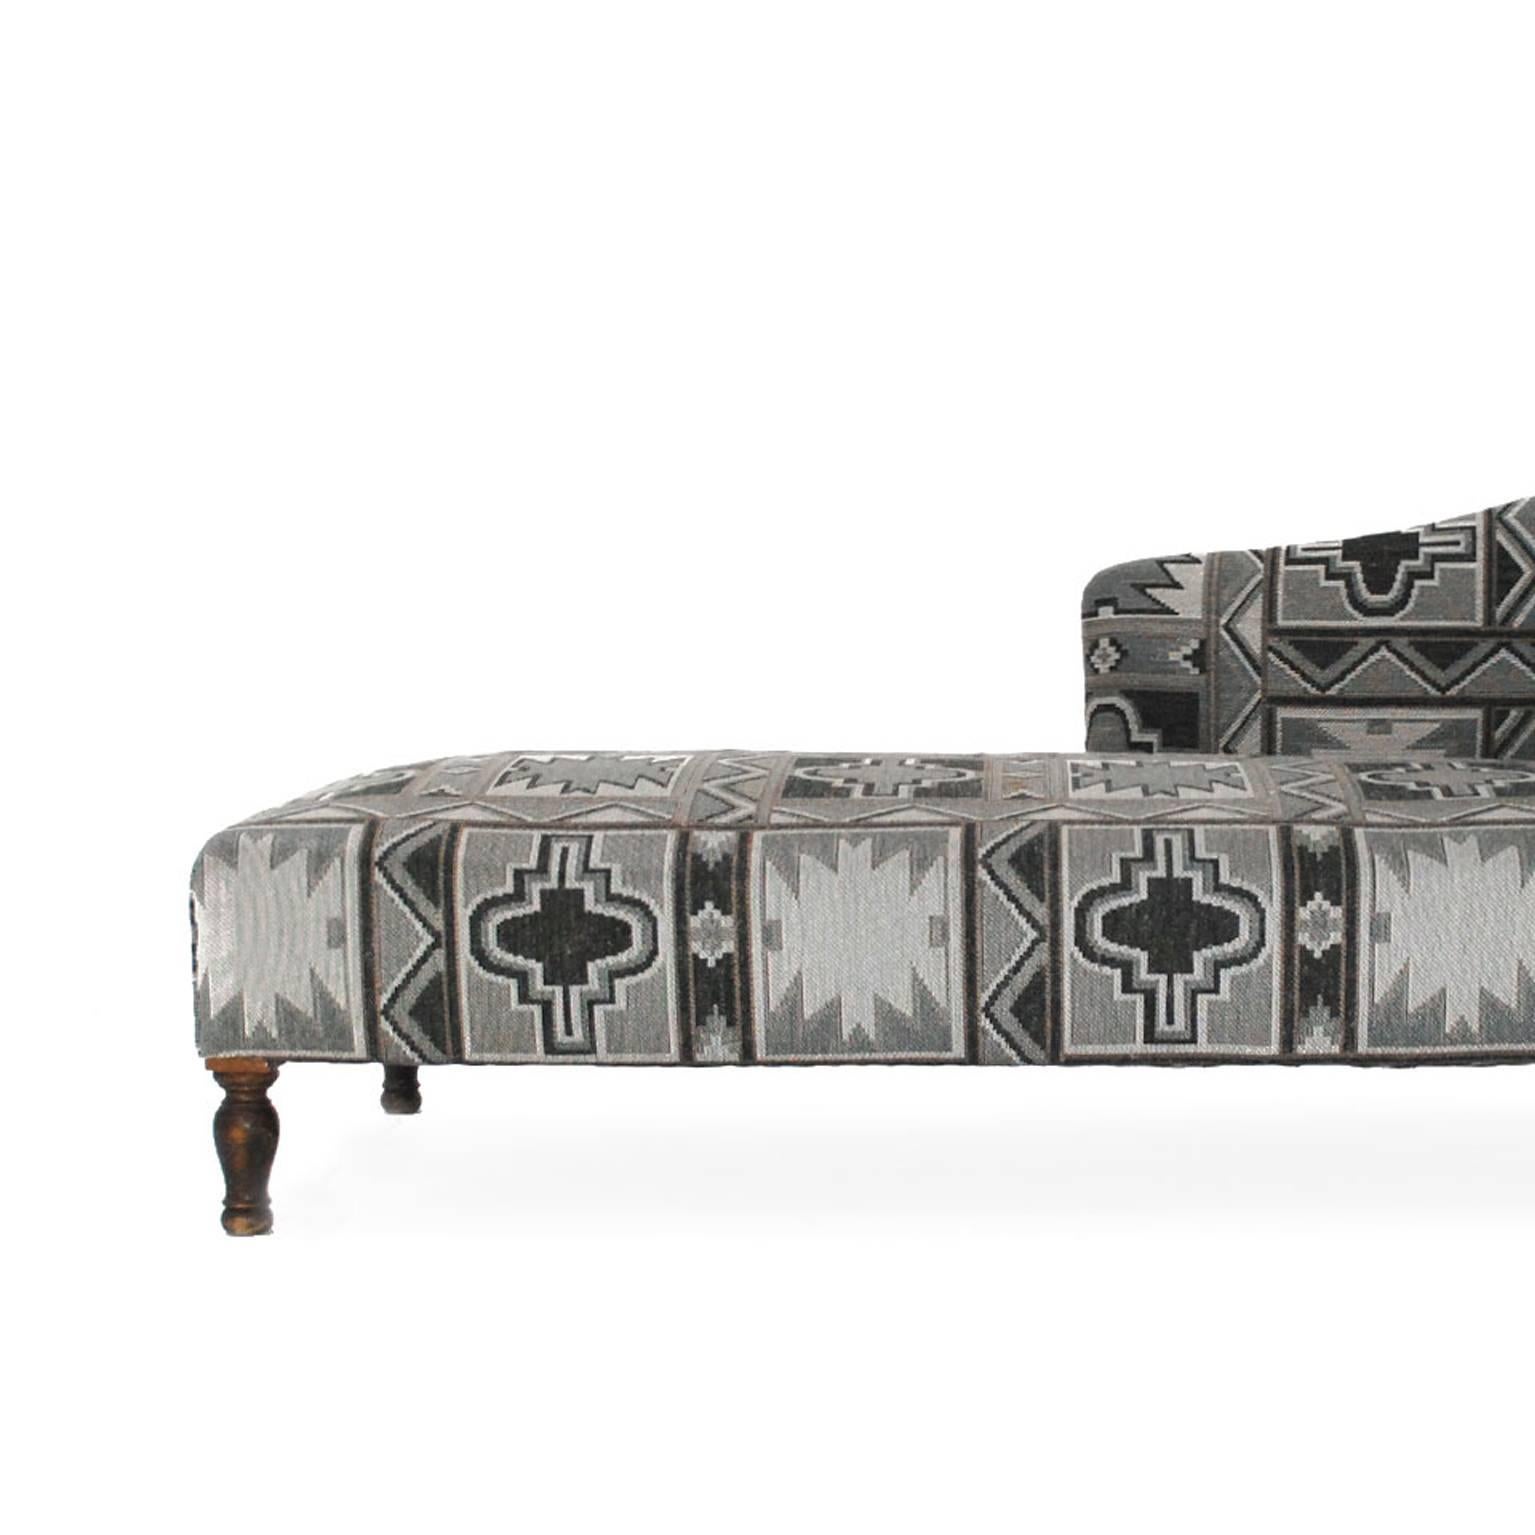 Chaise longue with structure in solid wood, upholstered in woolen cloth with ethnic print designed and edited by Gancedo.